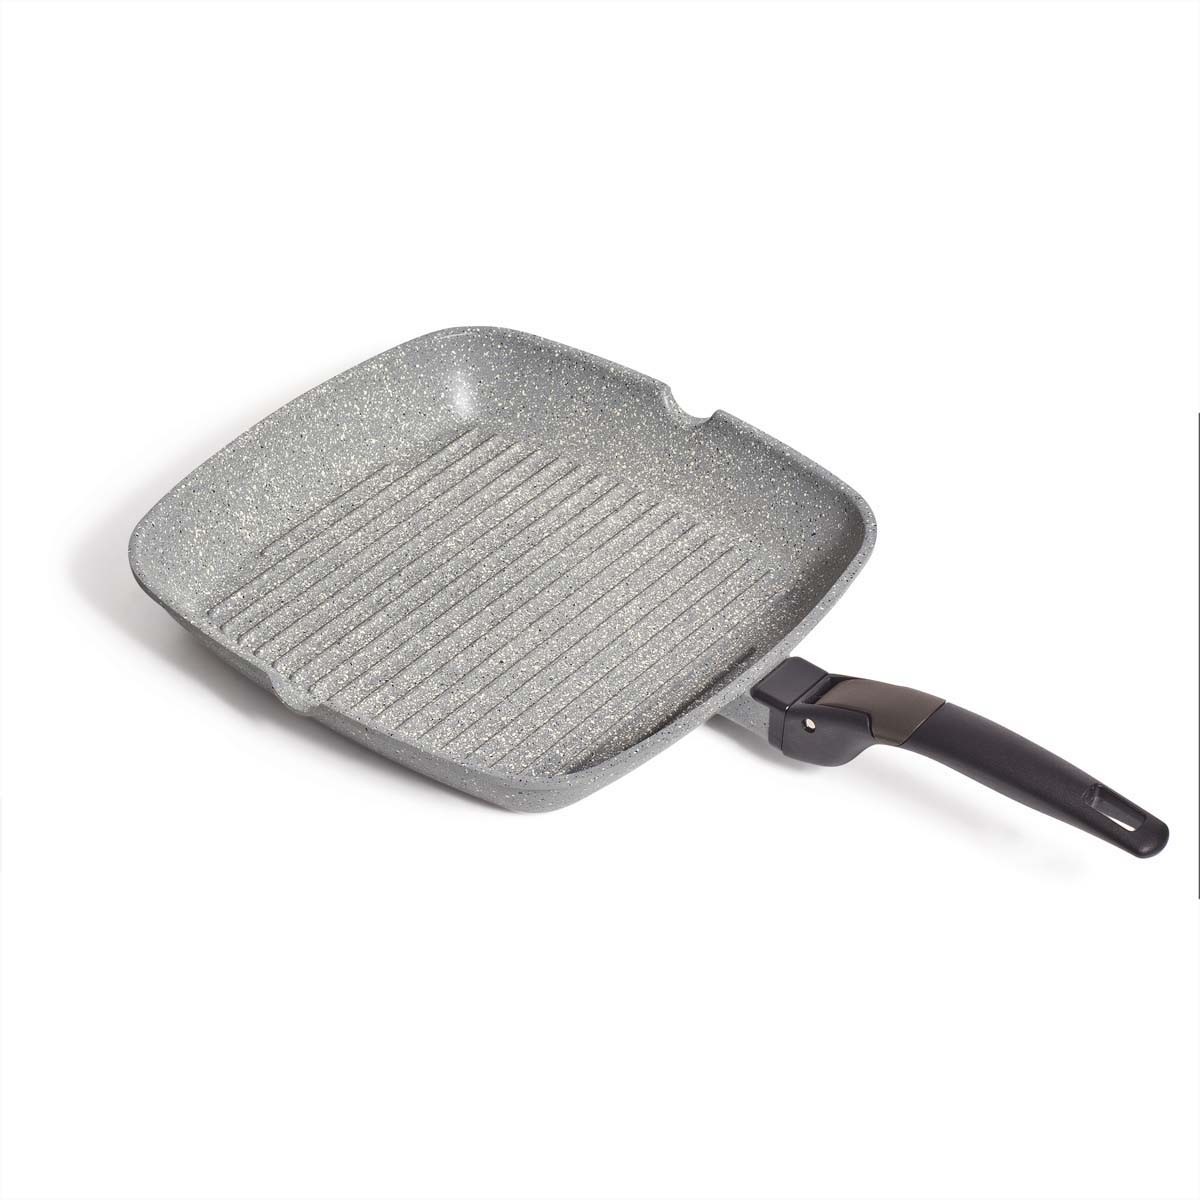 Campfire Griddle Frypan with Detachable Handle